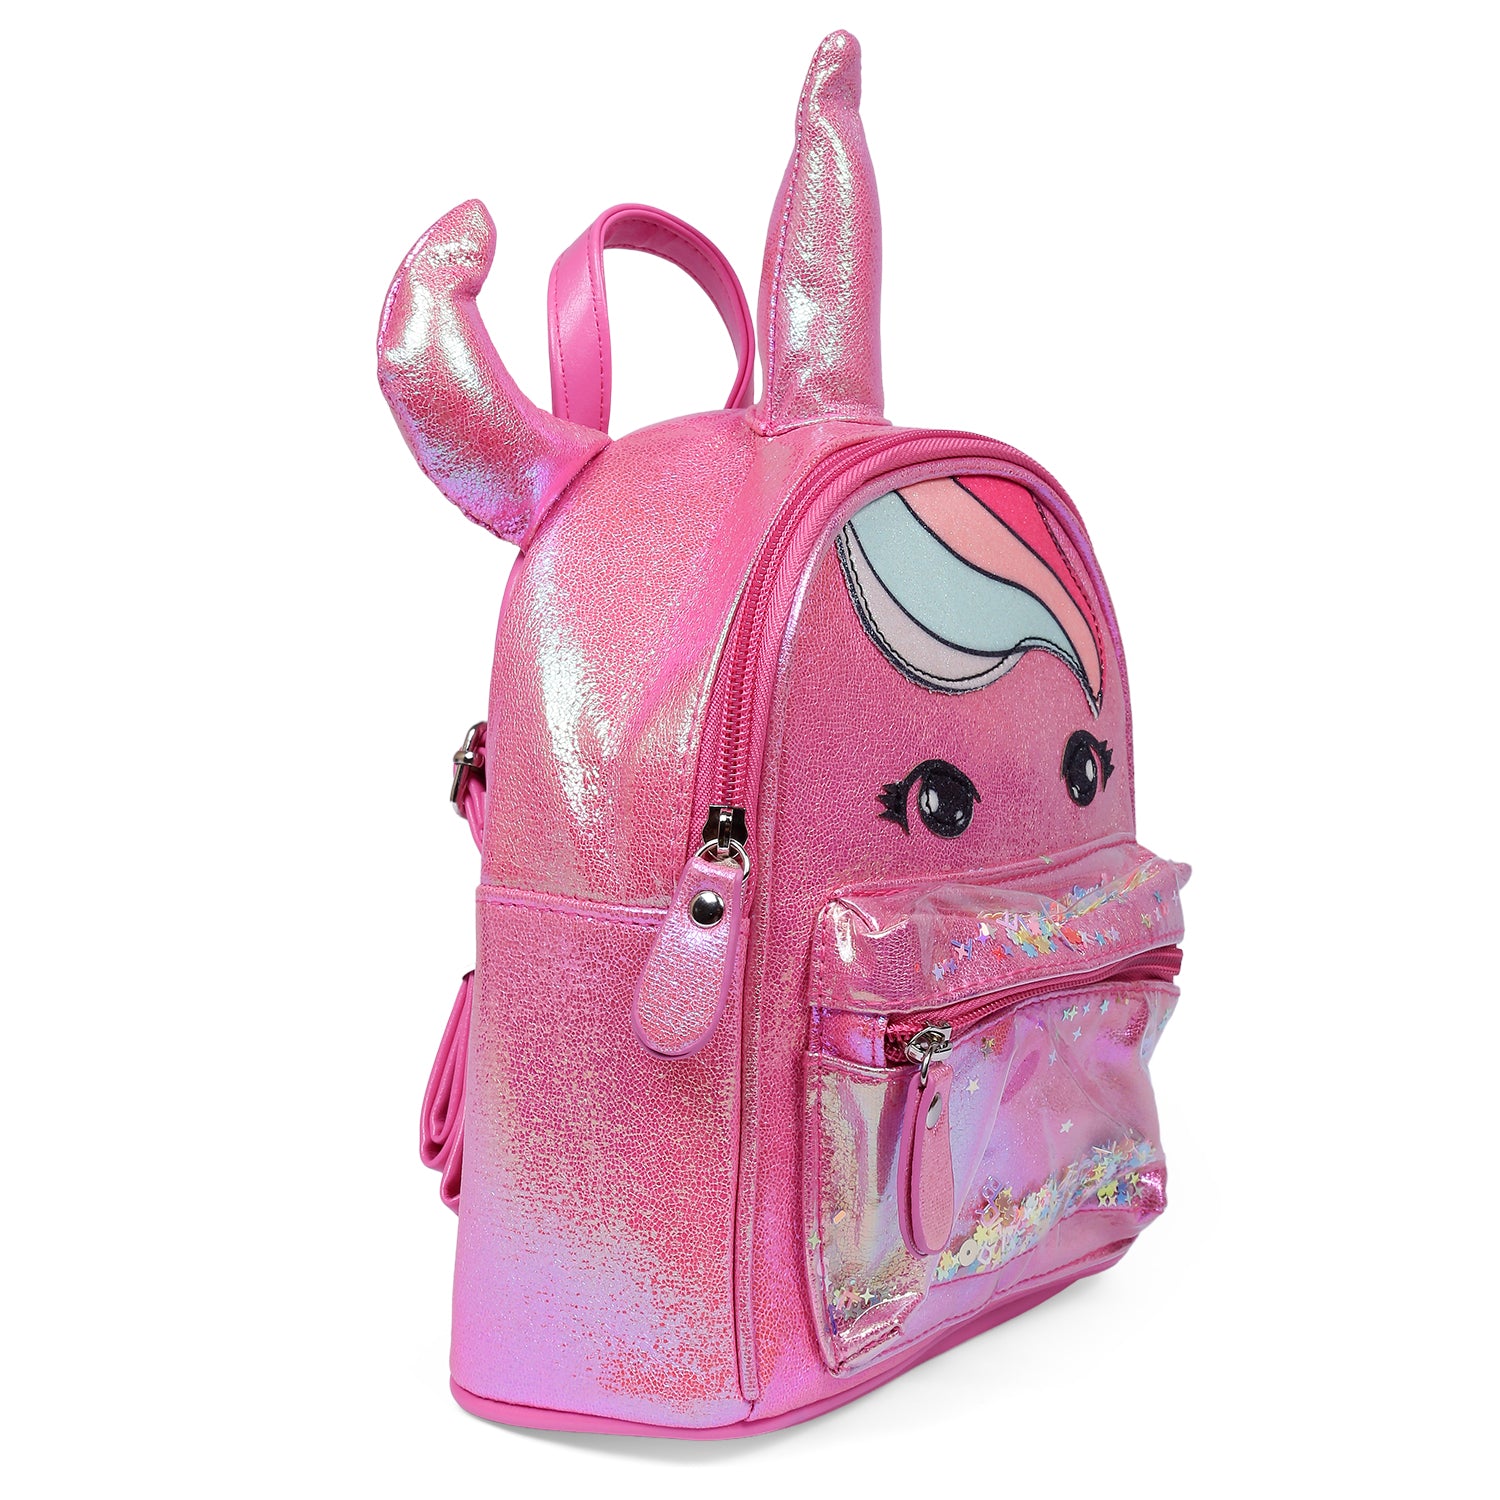 Unicorn Sequined Dual Tone Backpack Trendy Bag - Hot Pink - Baby Moo